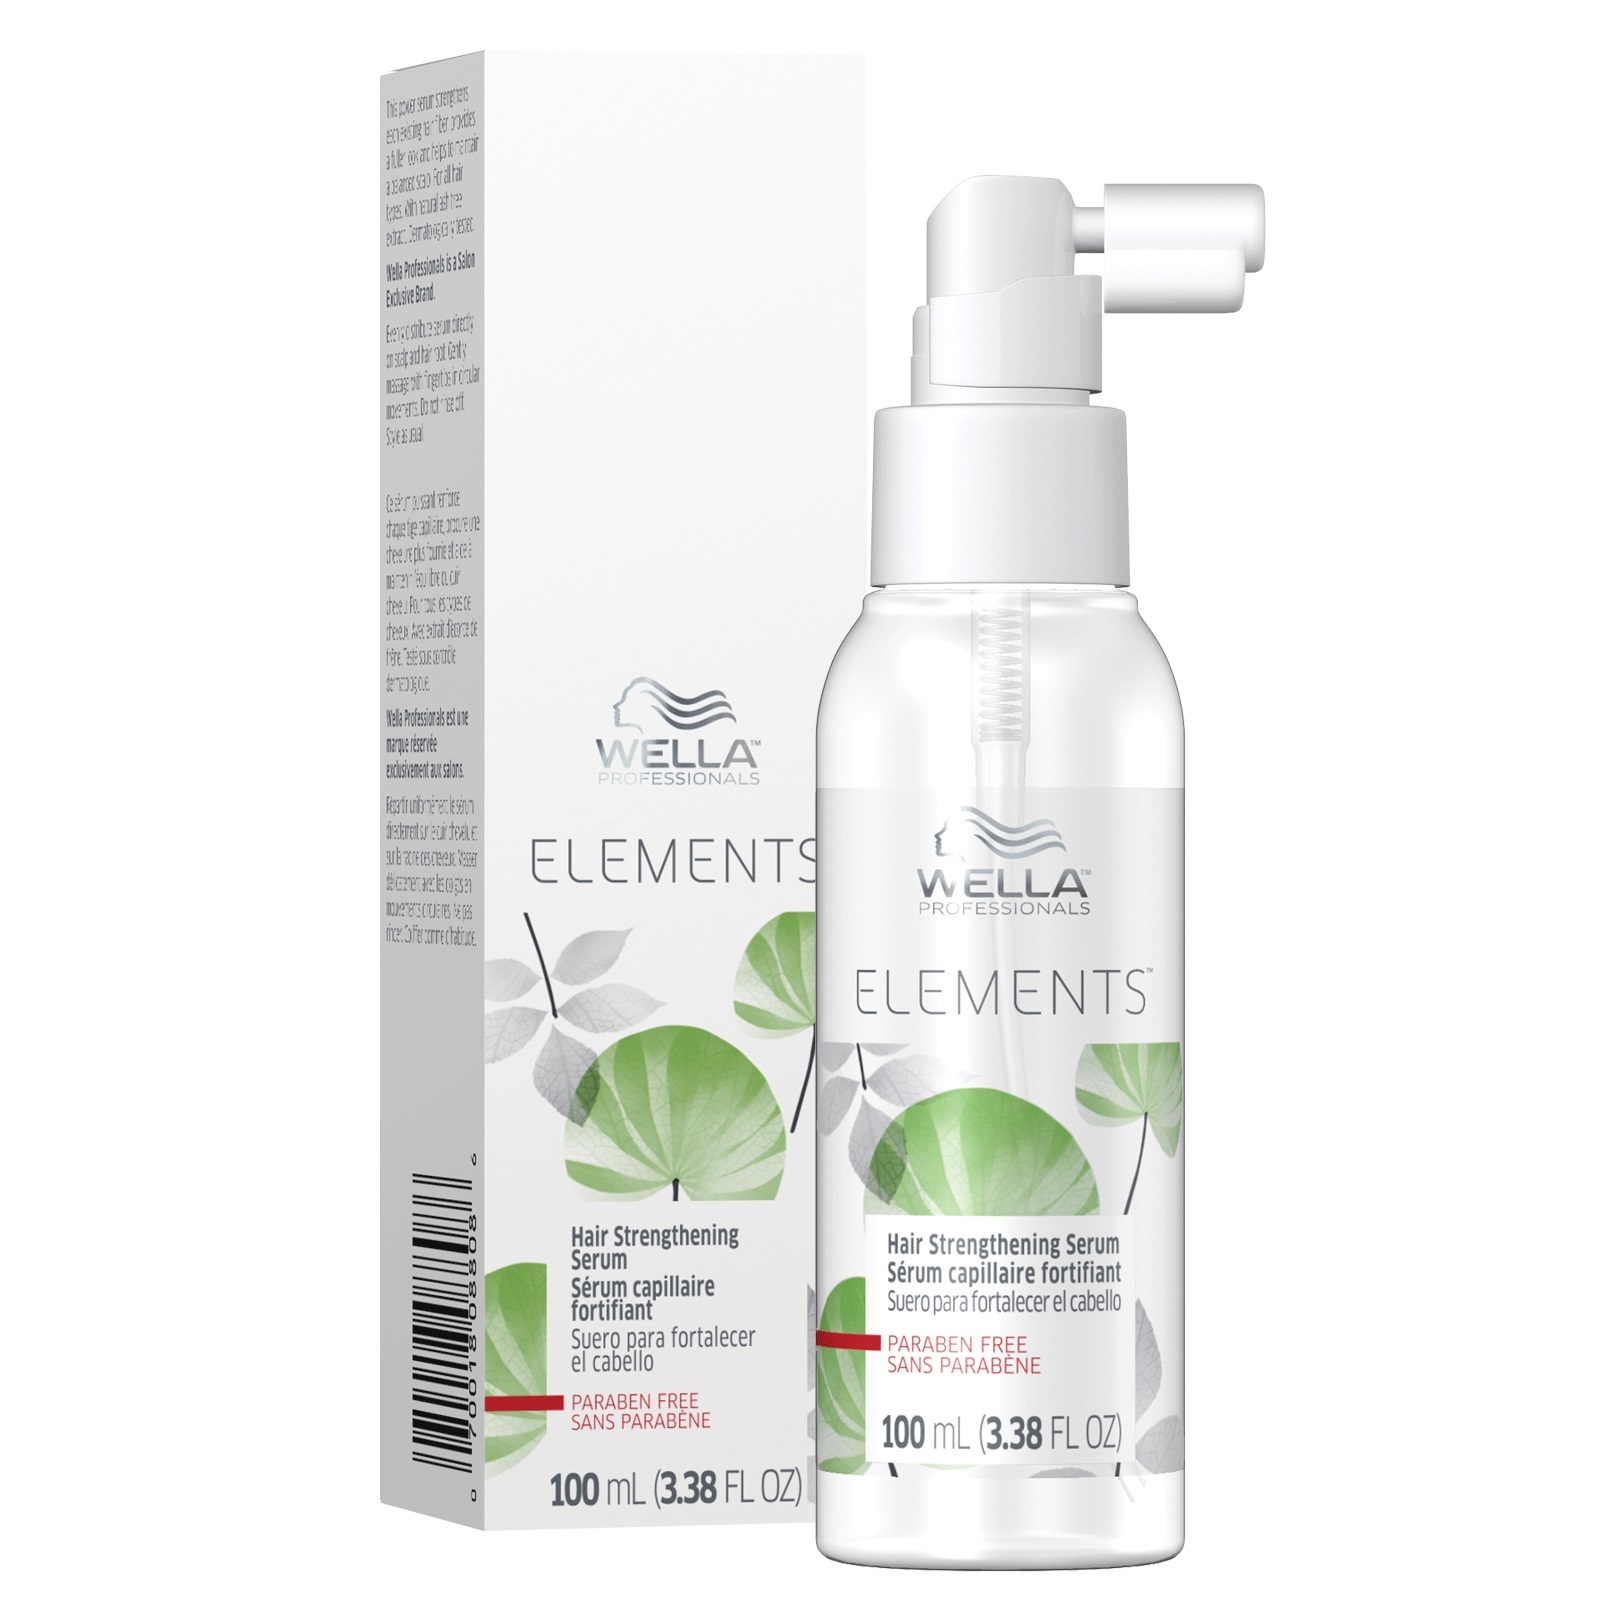 Primary image for Wella Elements Hair Strengthening Serum 3.38 oz